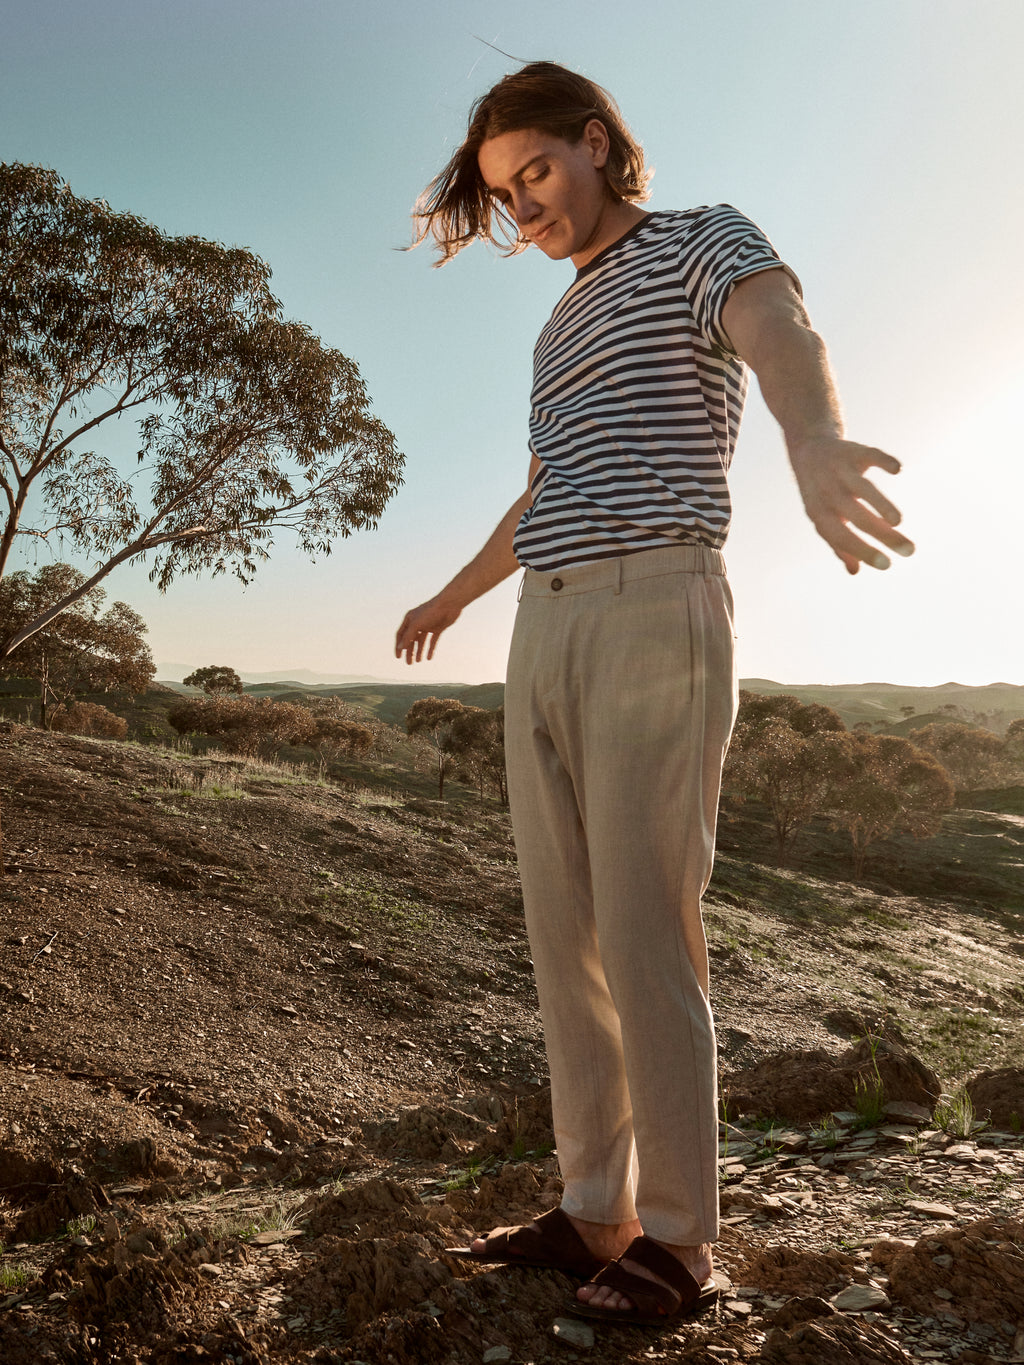 Male model wearing beige pants and striped T-shirt in a desert